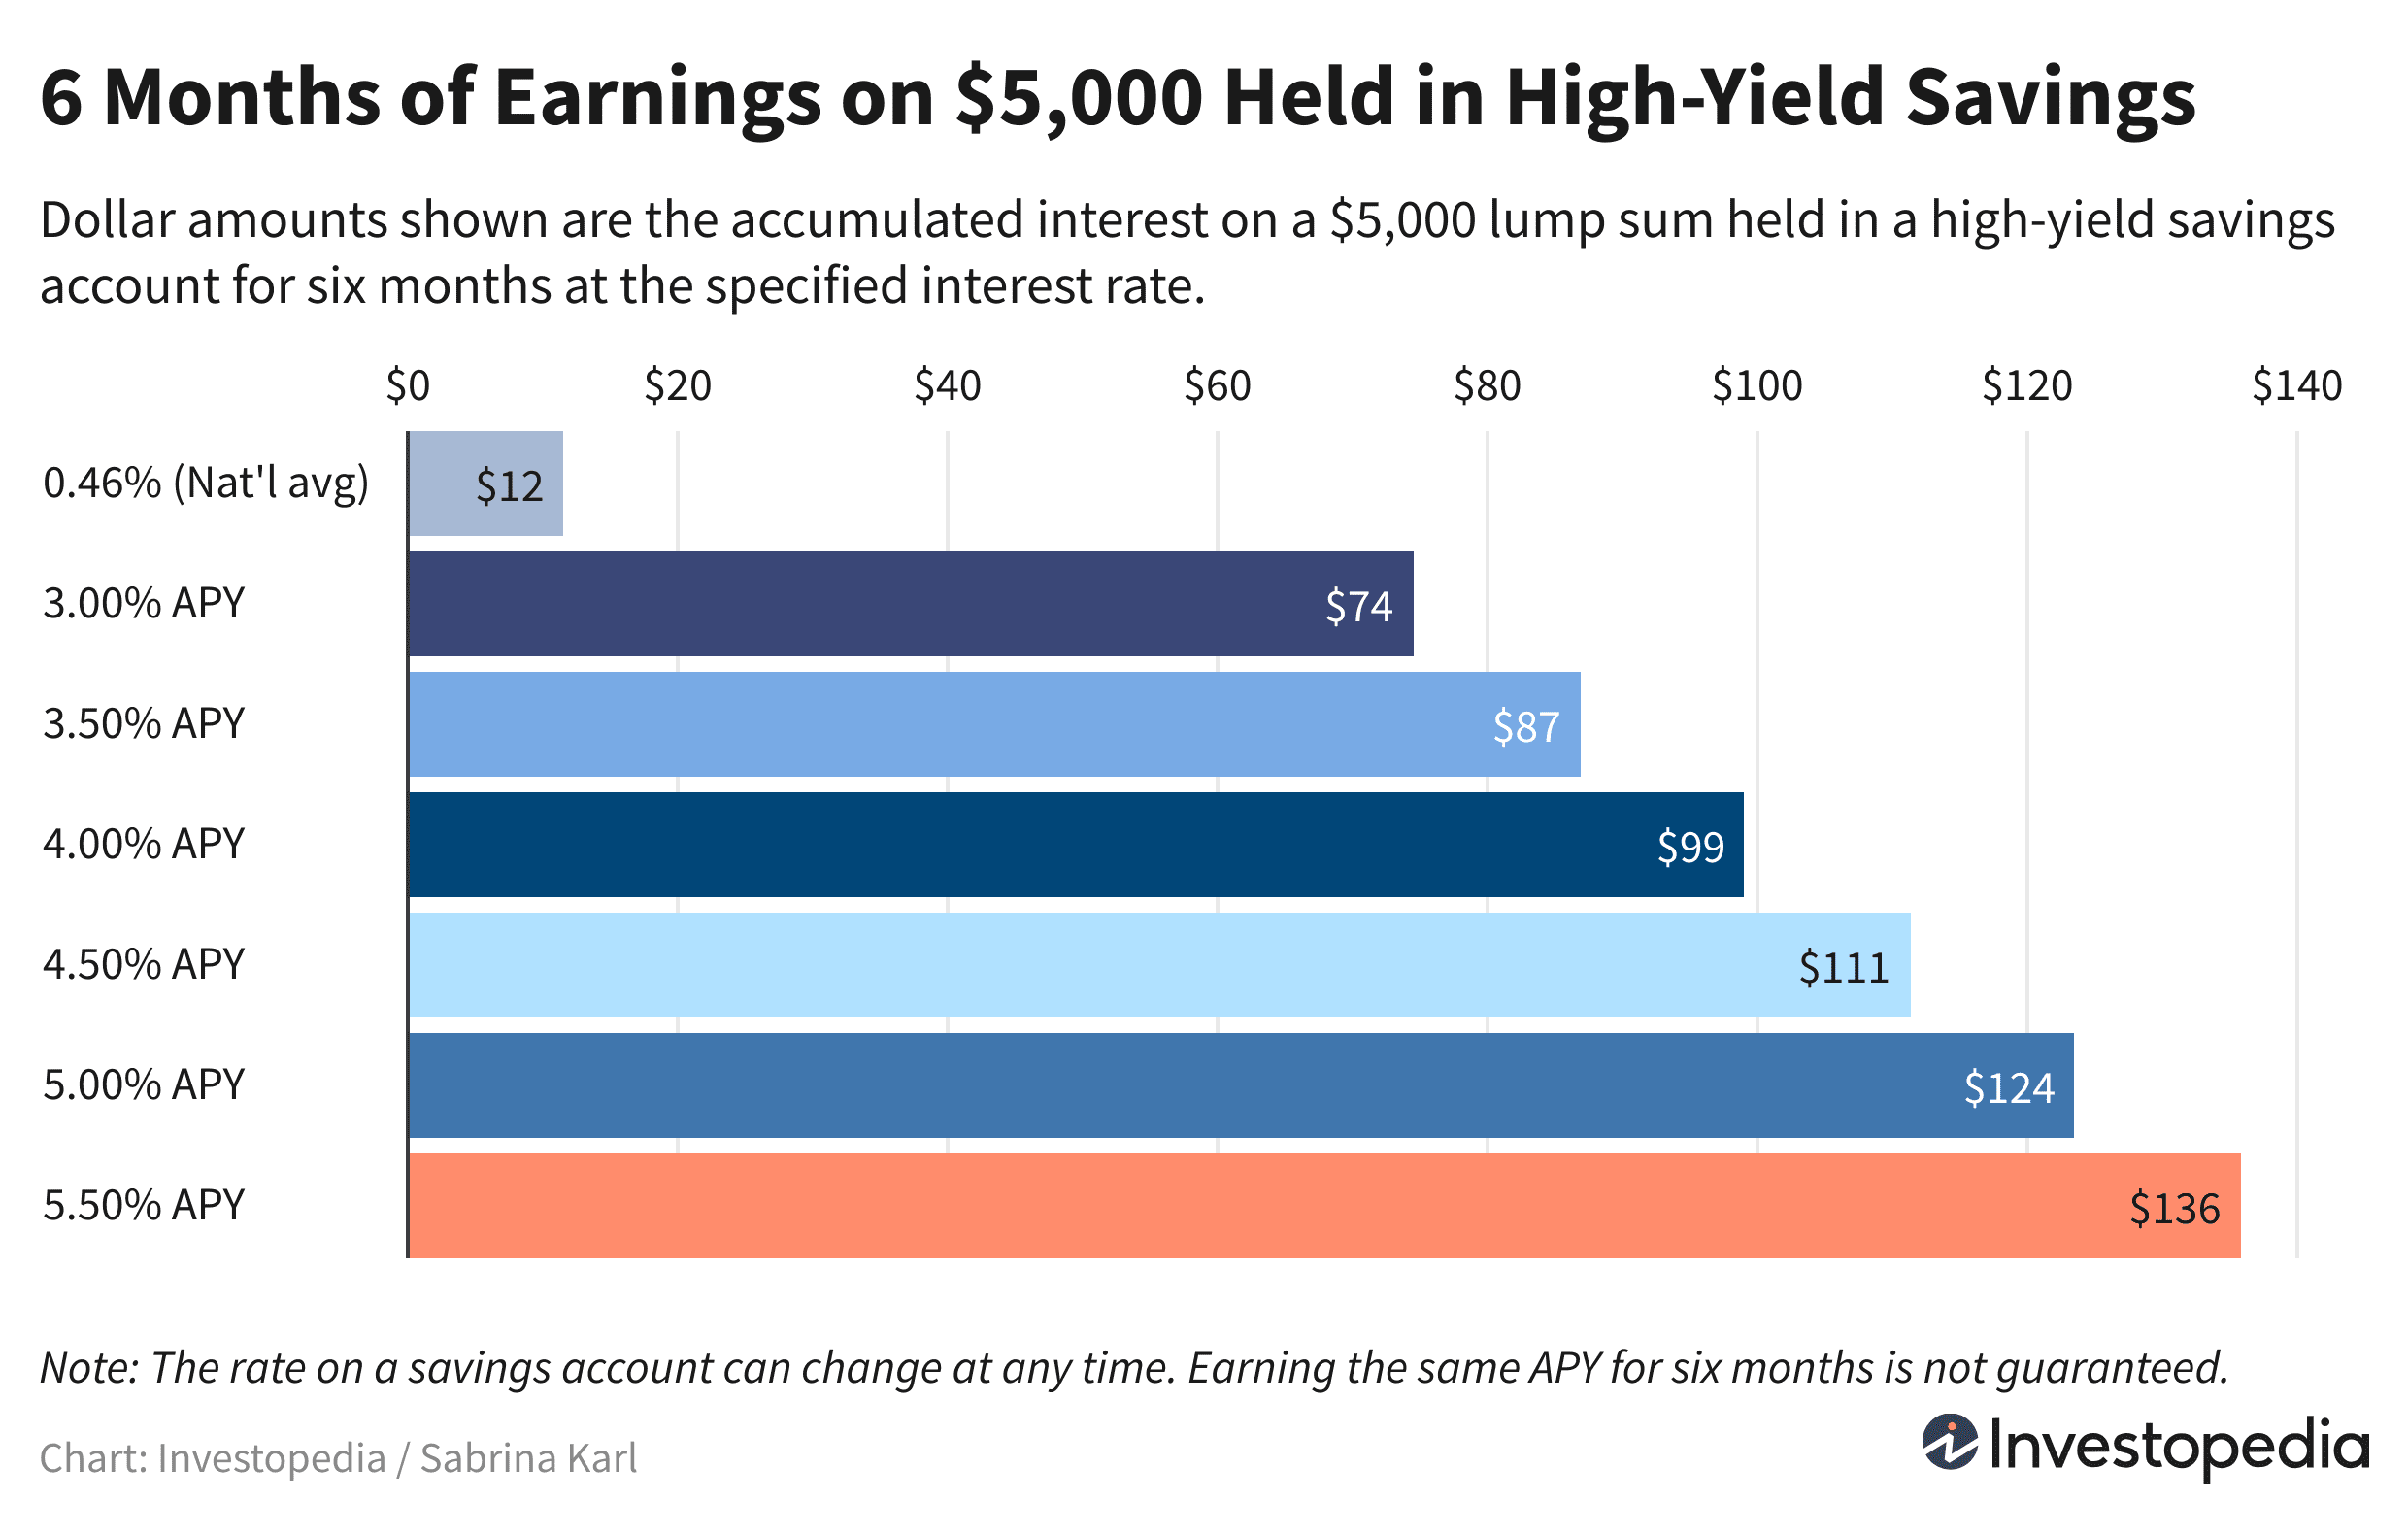 Bar graph showing how much you can earn with $5,000 in a high-yield savings account, assuming different APYs from 3% to 5.5%, and comparing those to earnings from the national average rate of 0.46%.